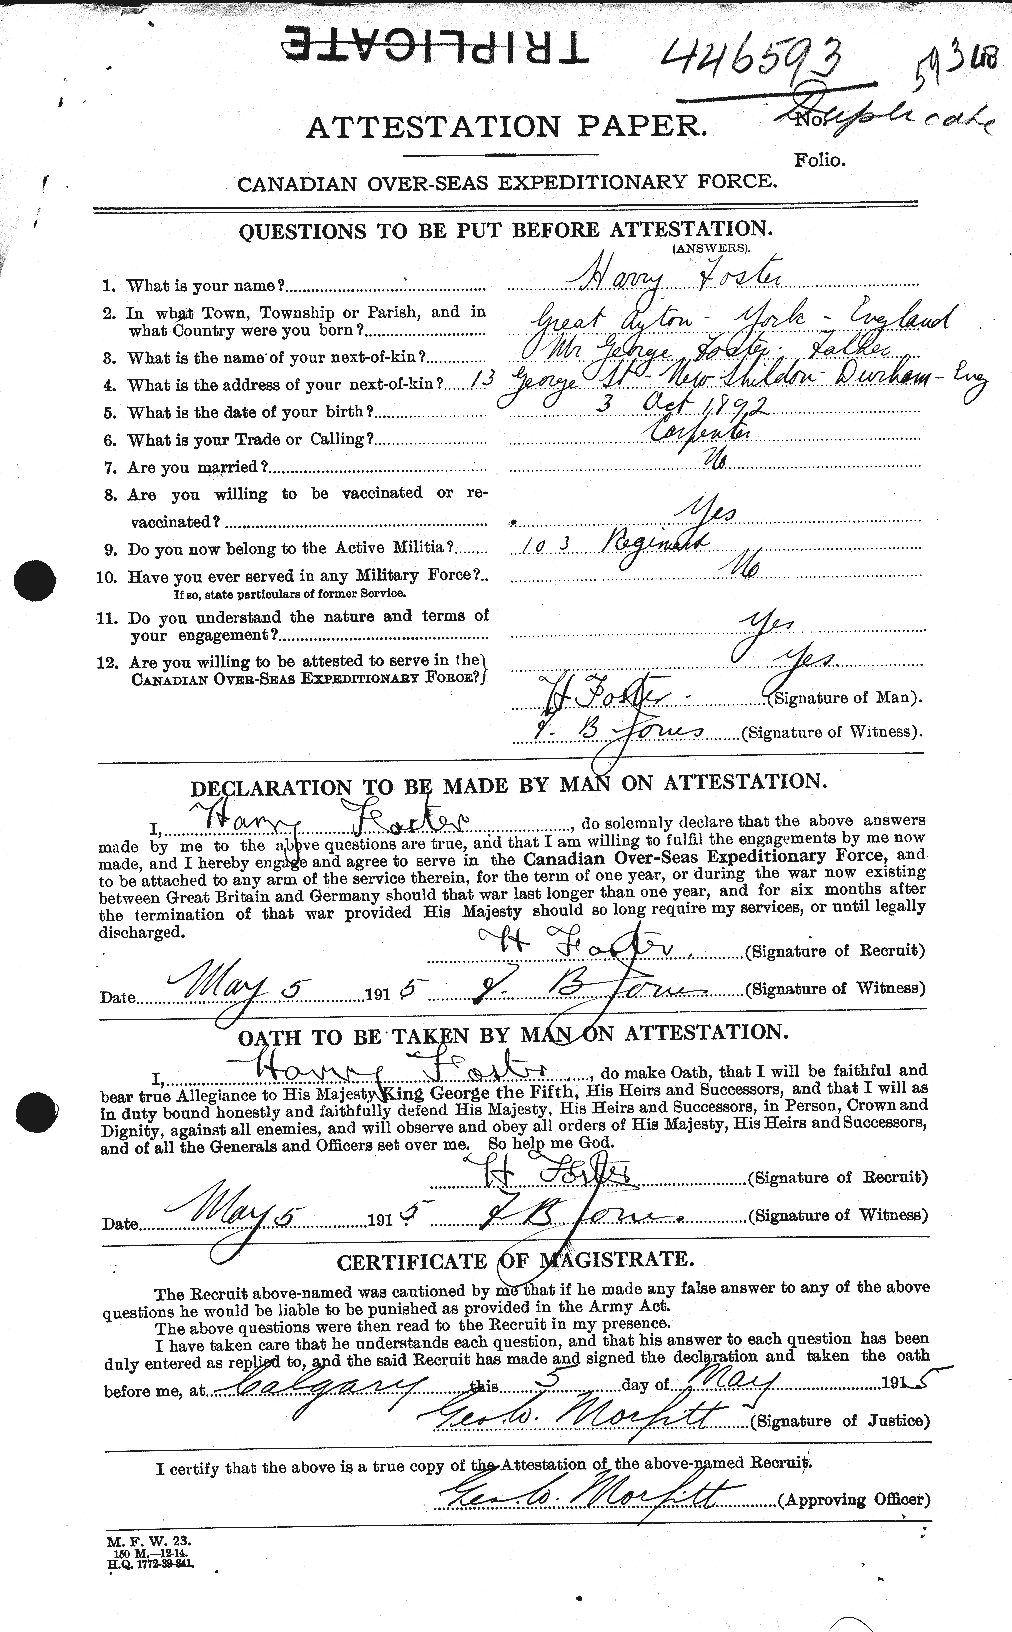 Personnel Records of the First World War - CEF 330736a